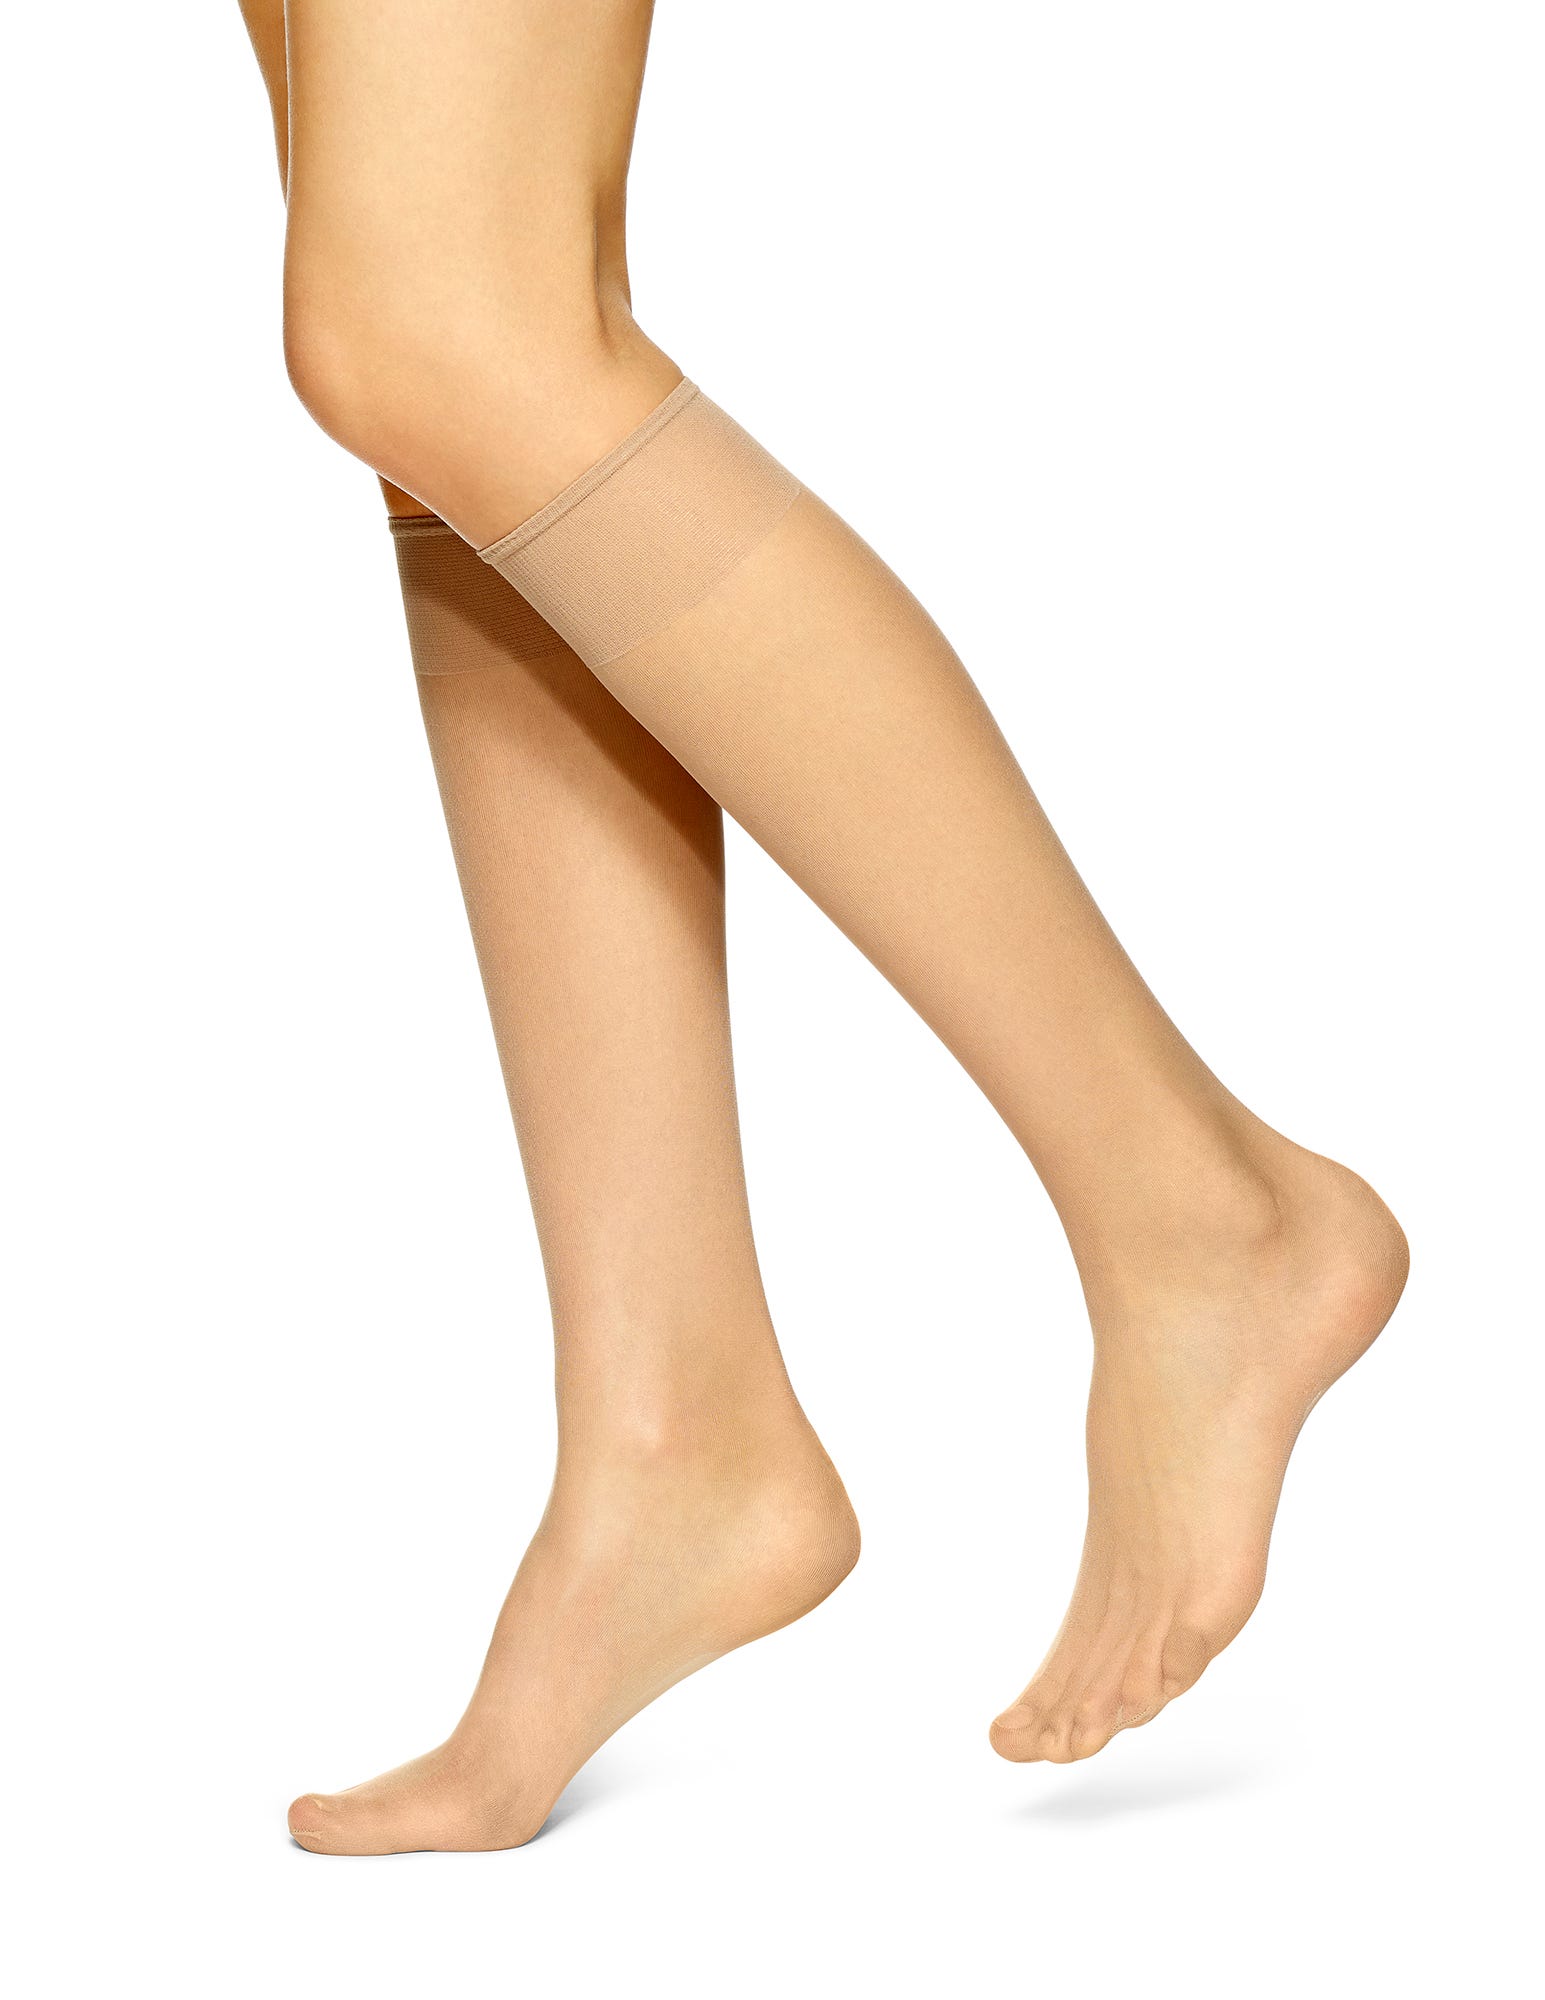 No Nonsense Nylon Knee Highs, Size One, Nude - 10 Pairs | Rite Aid